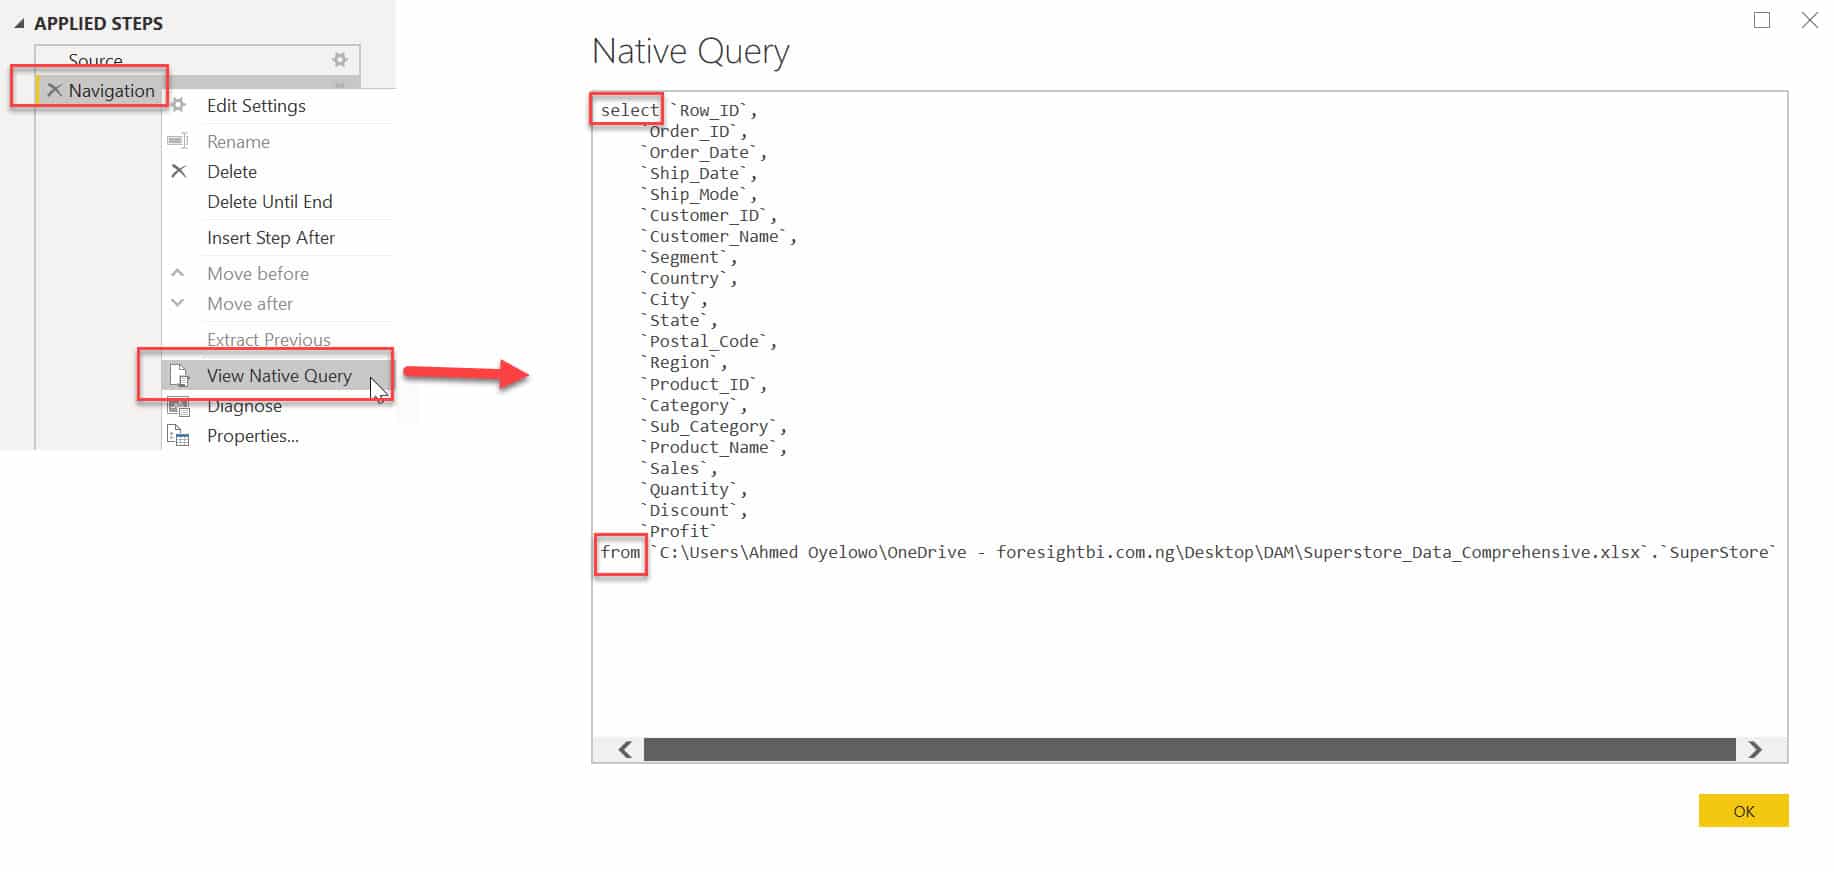 View Native Query